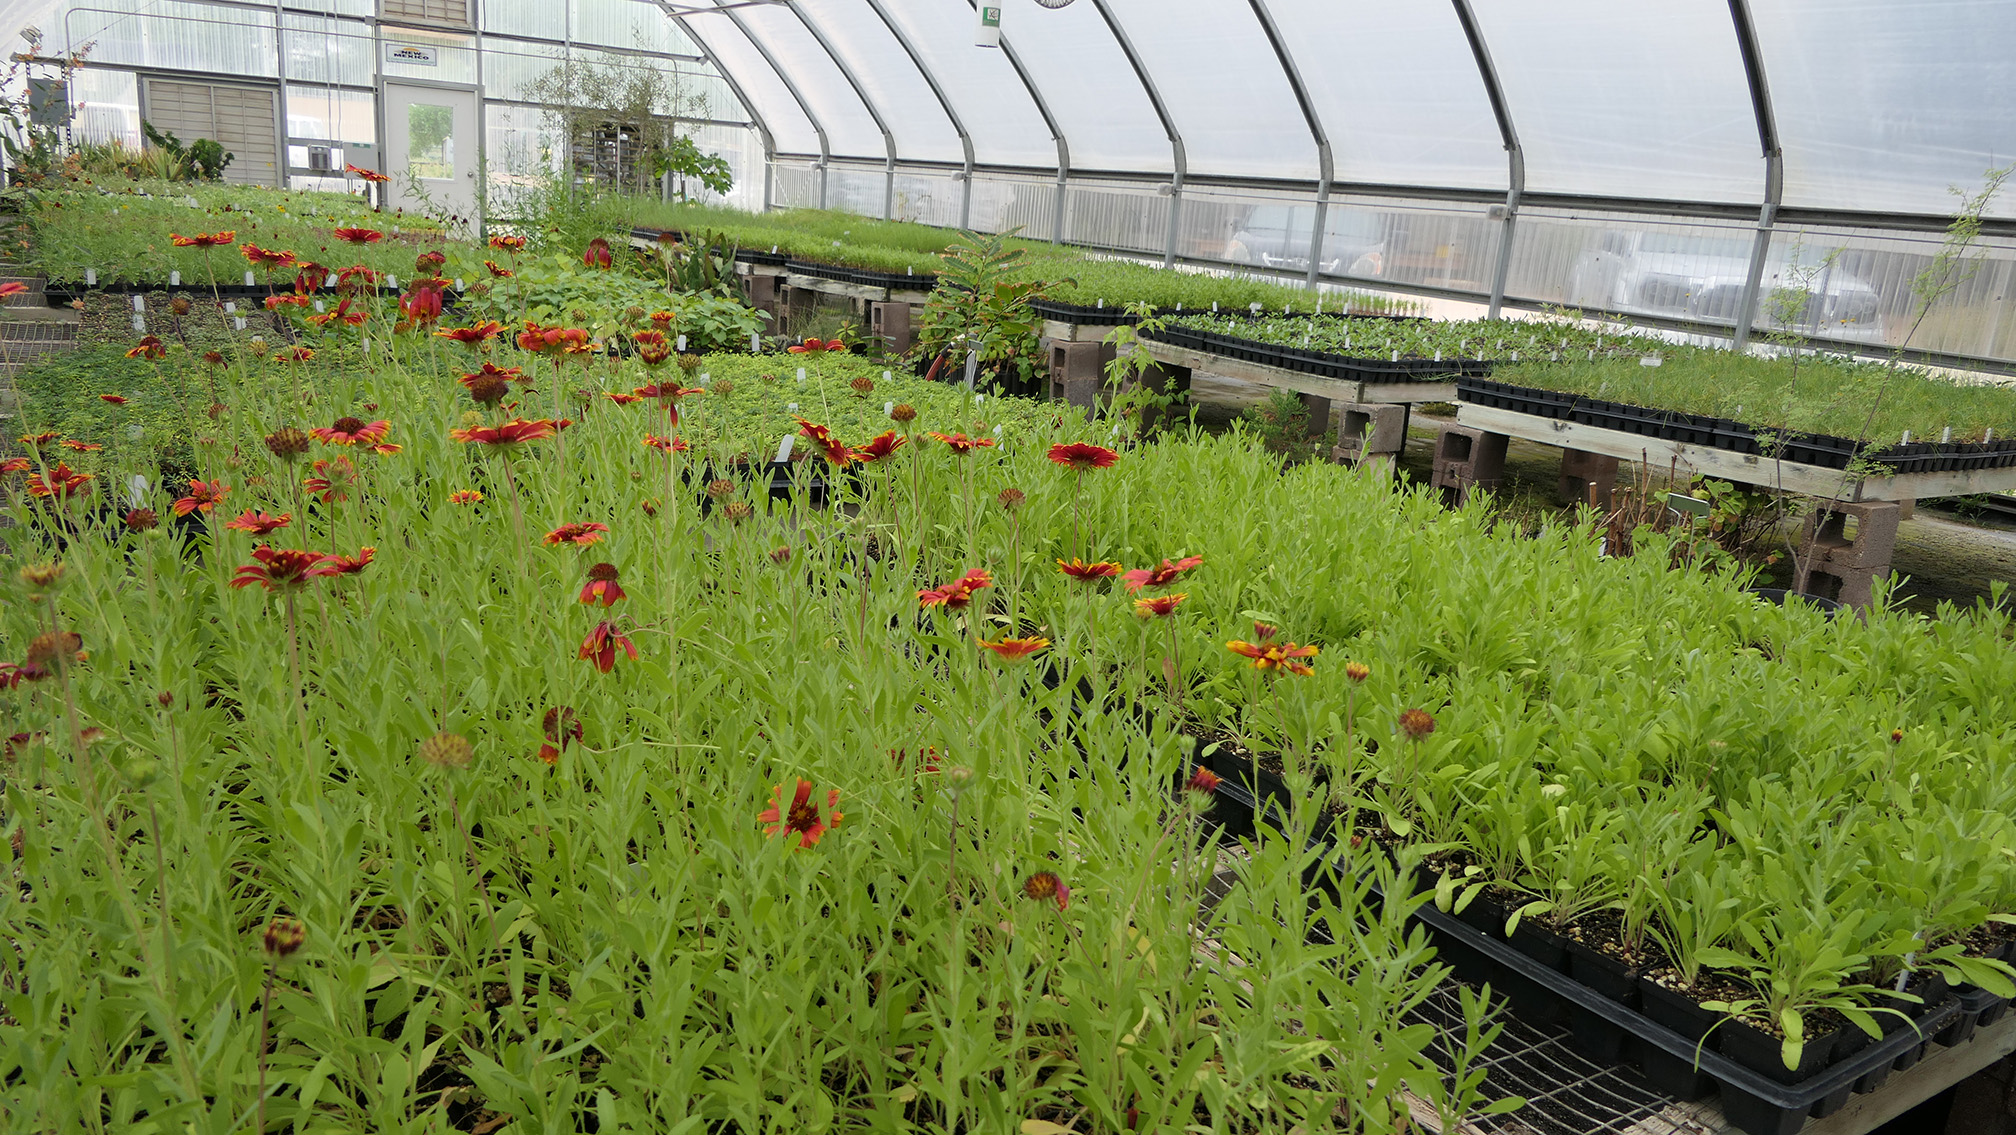 Inside a greenhouse, thousands of plants are growing in rows of trays. The greenhouse has a gray metal frame supporting translucent panels. The roof arches above the plants. The plants are all small, just the early growth of leaves, except for one block of plants in the foreground that are taller and have red flowers.